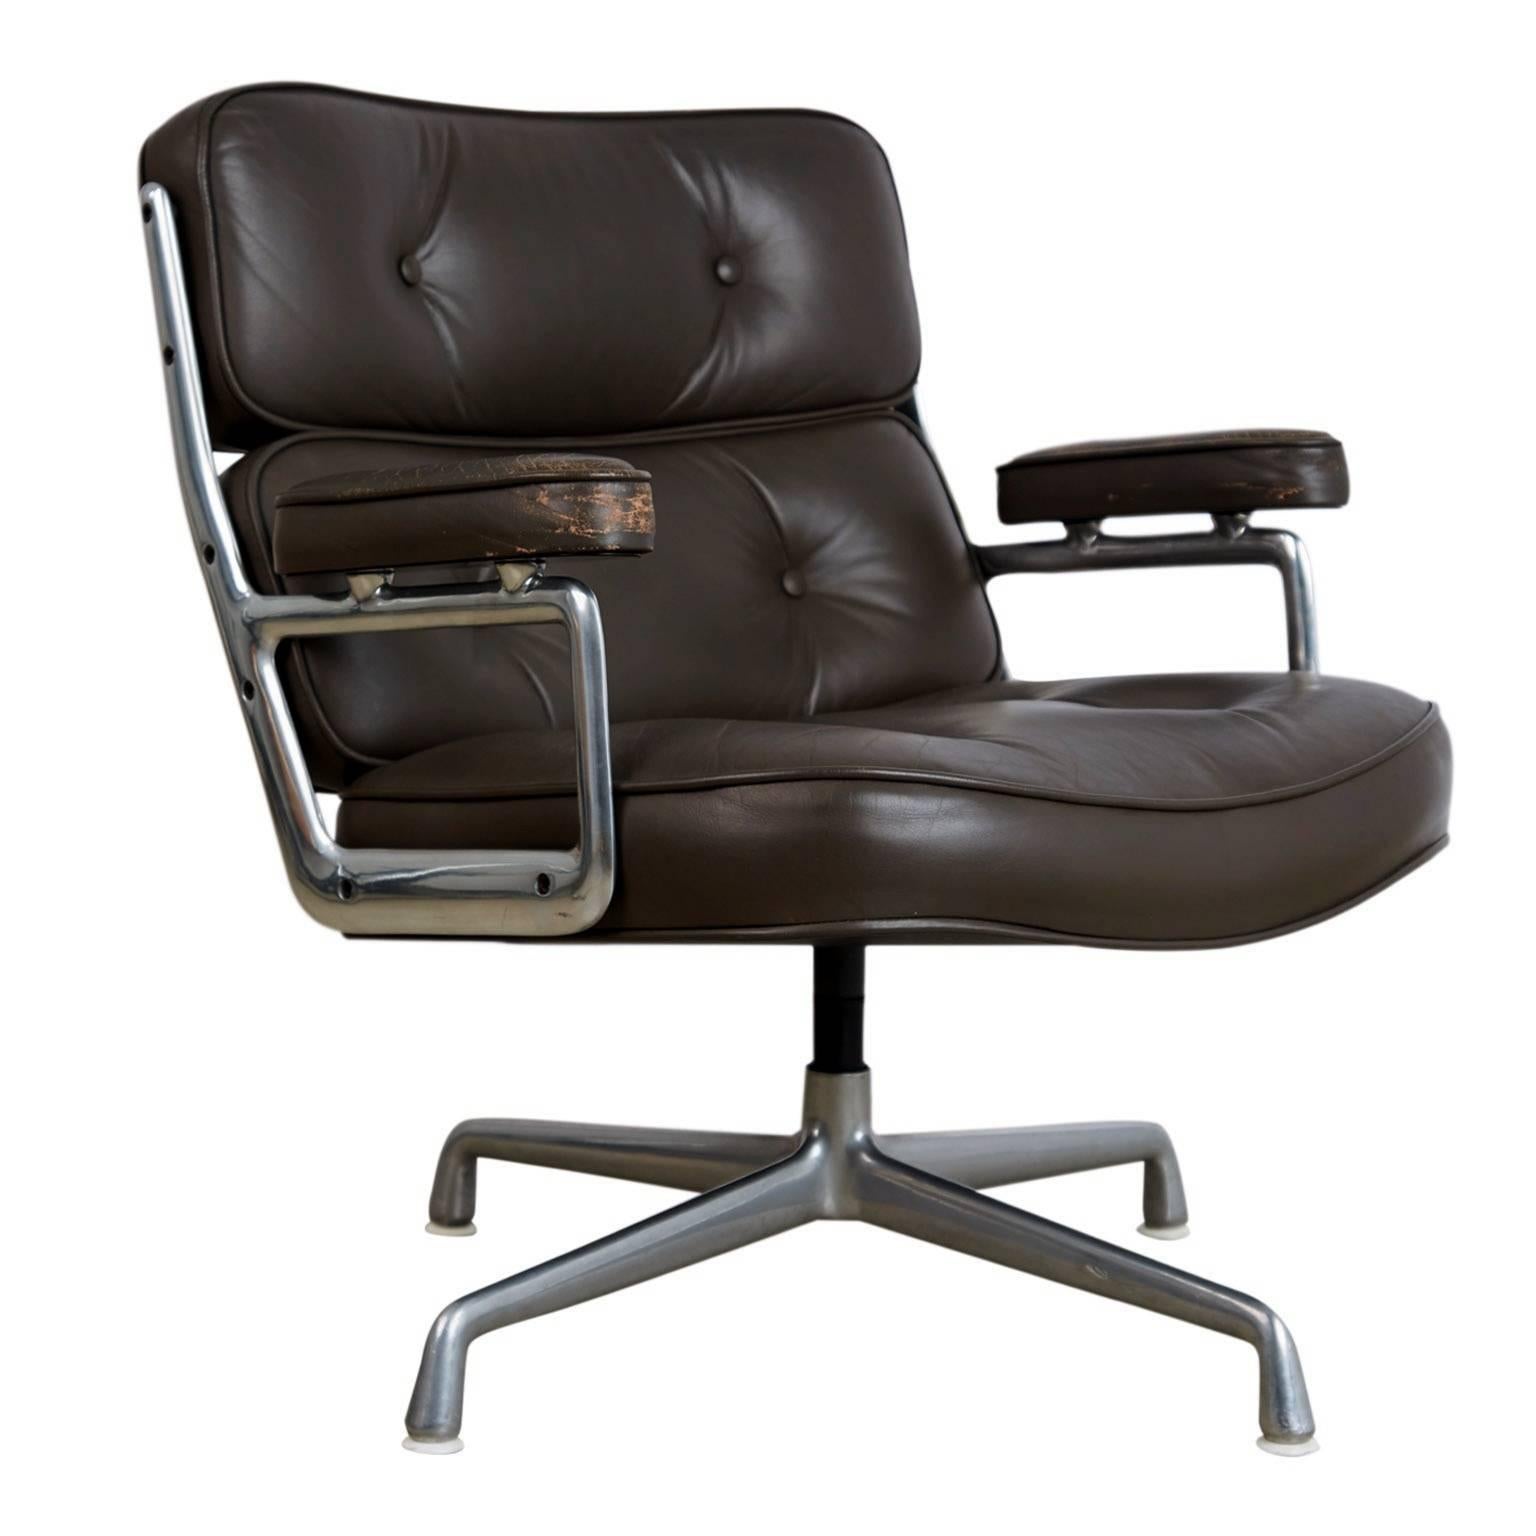 American Dark Grey Time Life Lobby Lounge Chairs by Charles Eames for Herman Miller 